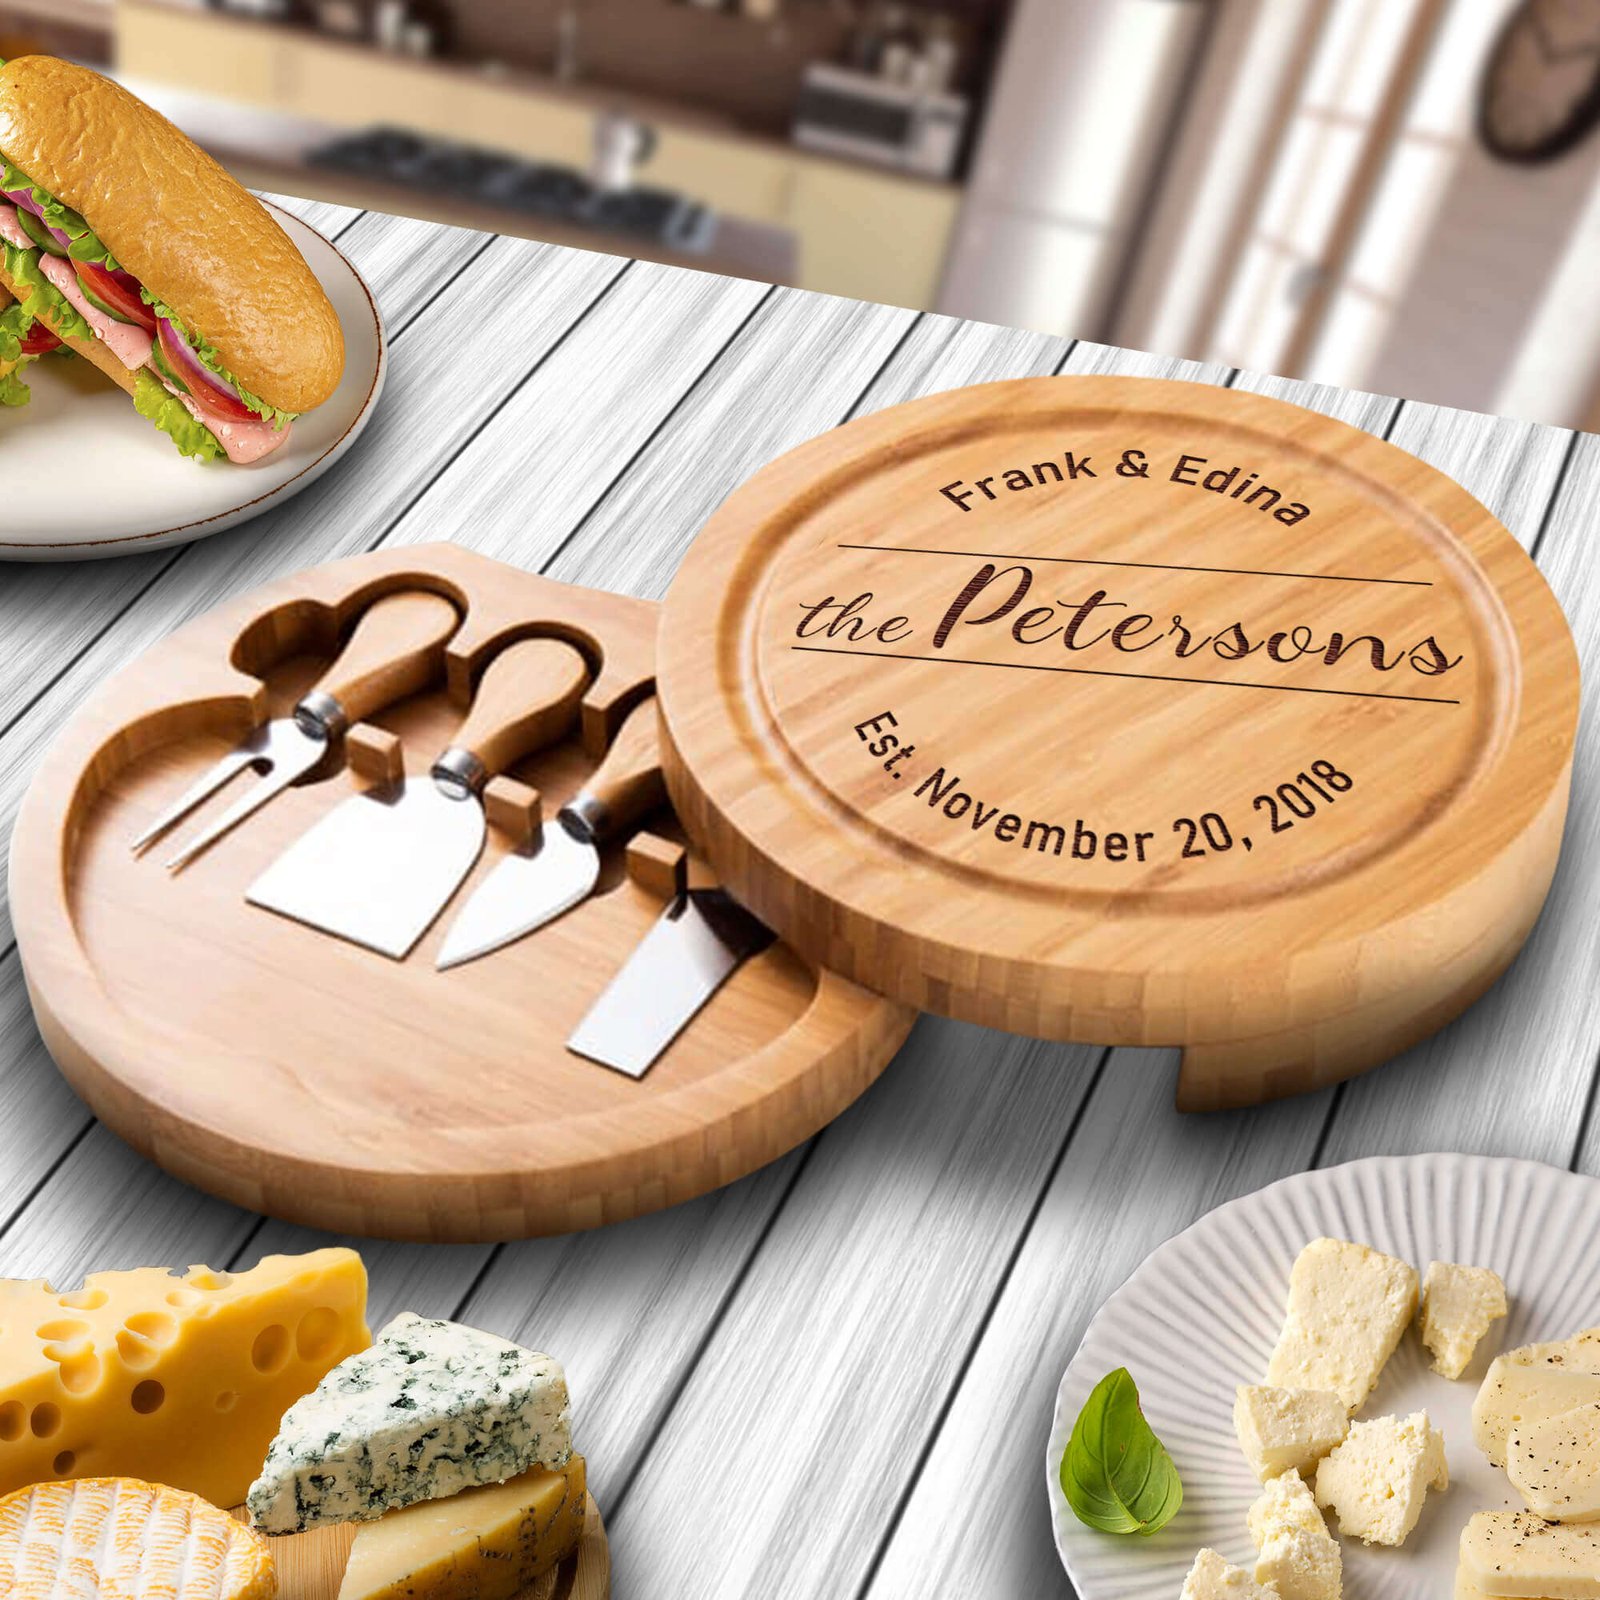 https://www.asperadesign.store/wp-content/uploads/2021/11/1.-Unique-Housewarming-Gifts-Stylish-Cheese-Board-and-Knife-Set-Engraved-Serving-Trays-and-Charcuterie-Platter-Ideas-Aspera-Design.jpg